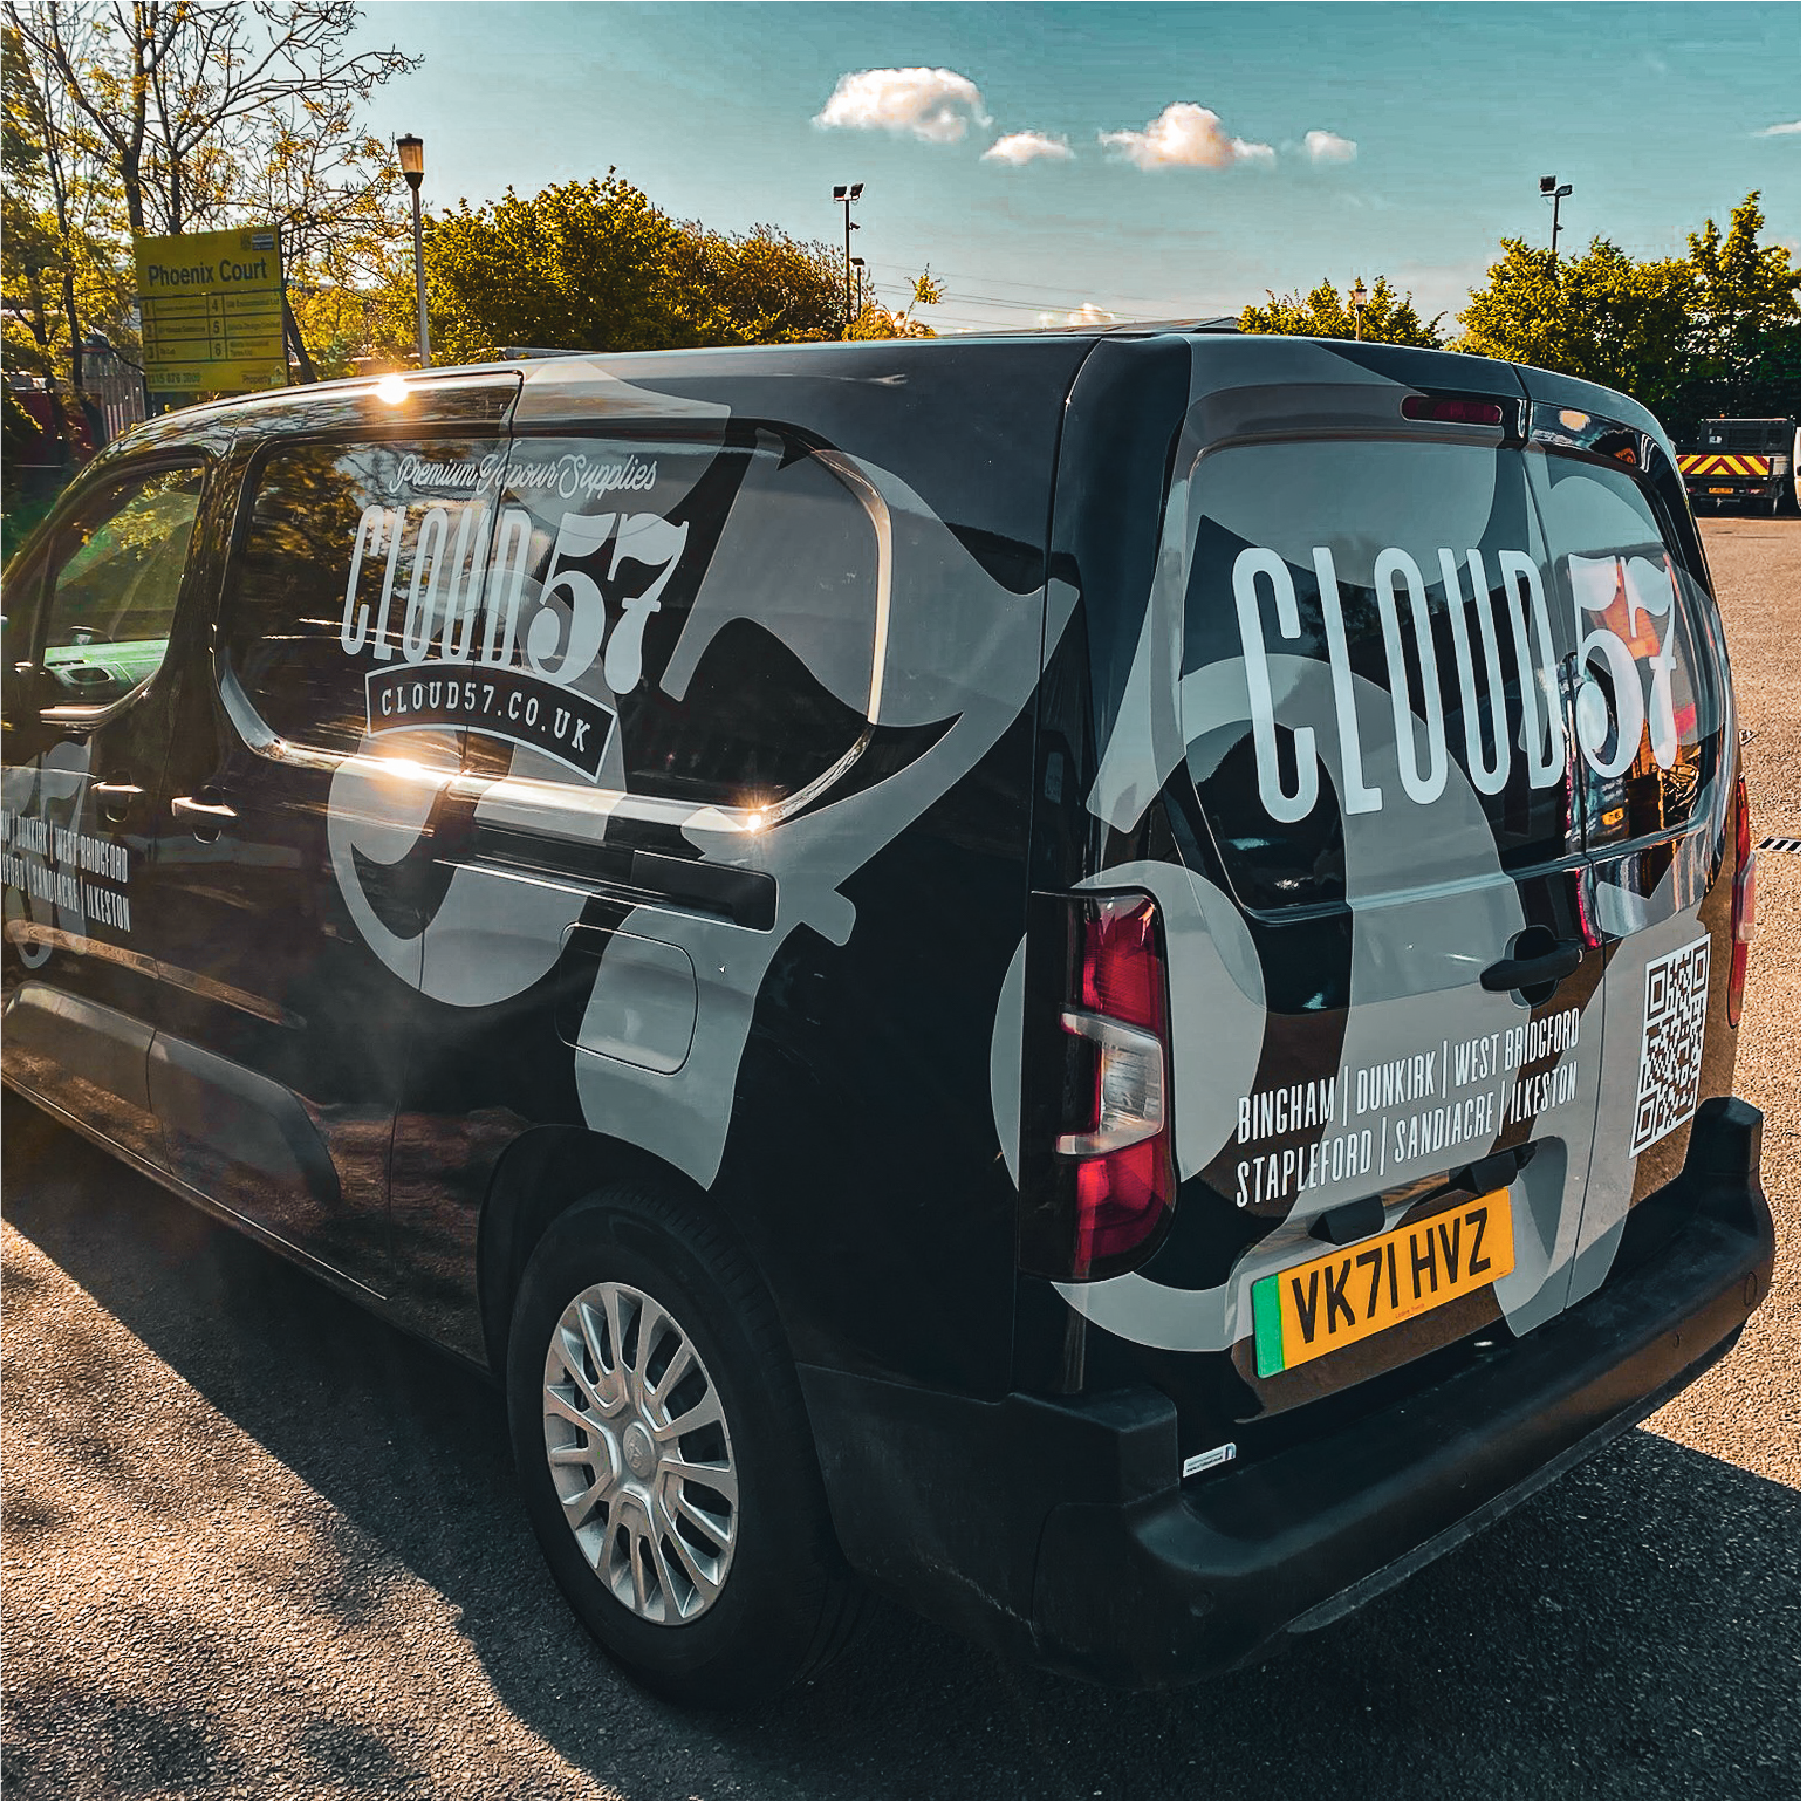 The back corner of a black van with a large 57 graphic on. Over the top of this it says 'Cloud 57' and 'Premium Vapour Supplies'. There is a list of shop locations and a QR code on the back of the van.